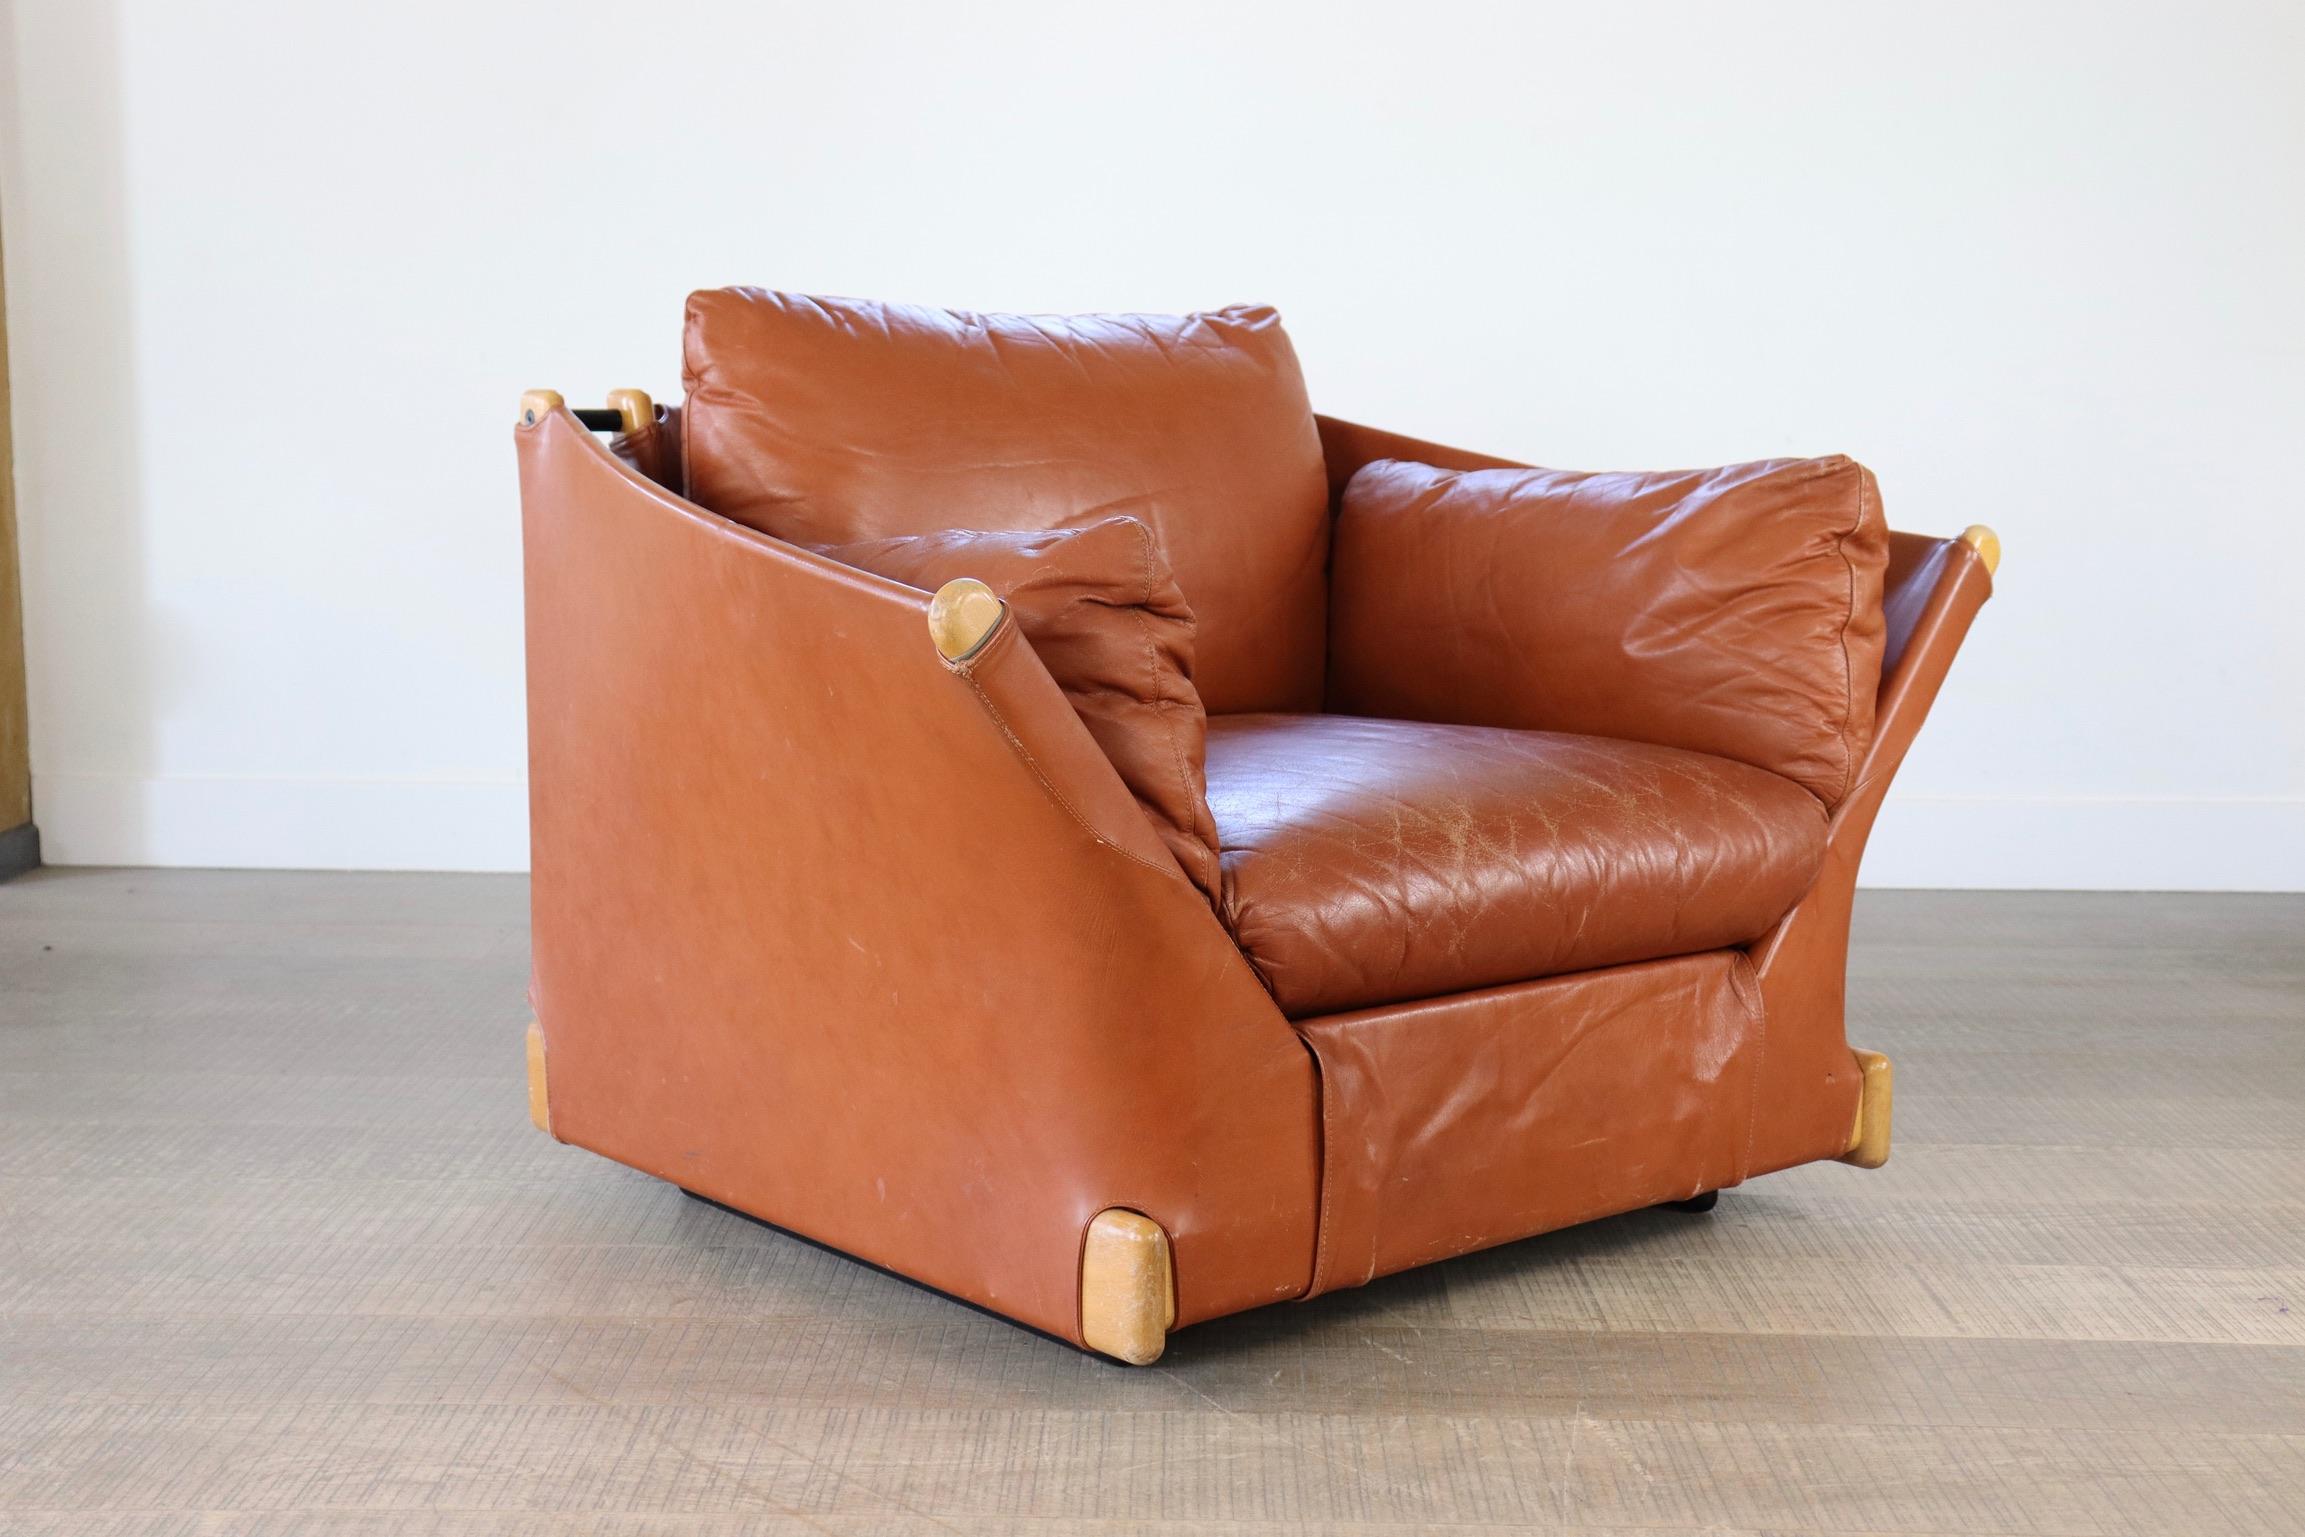 Cassina 'Viola d'amore' Armchair by Piero de Martini, 1977. Remarkably comfortable, magnificent cognac leather seats in amazing vintage condition, as Cassina is known for its use of high-quality materials. The Down-filled cushions make these club